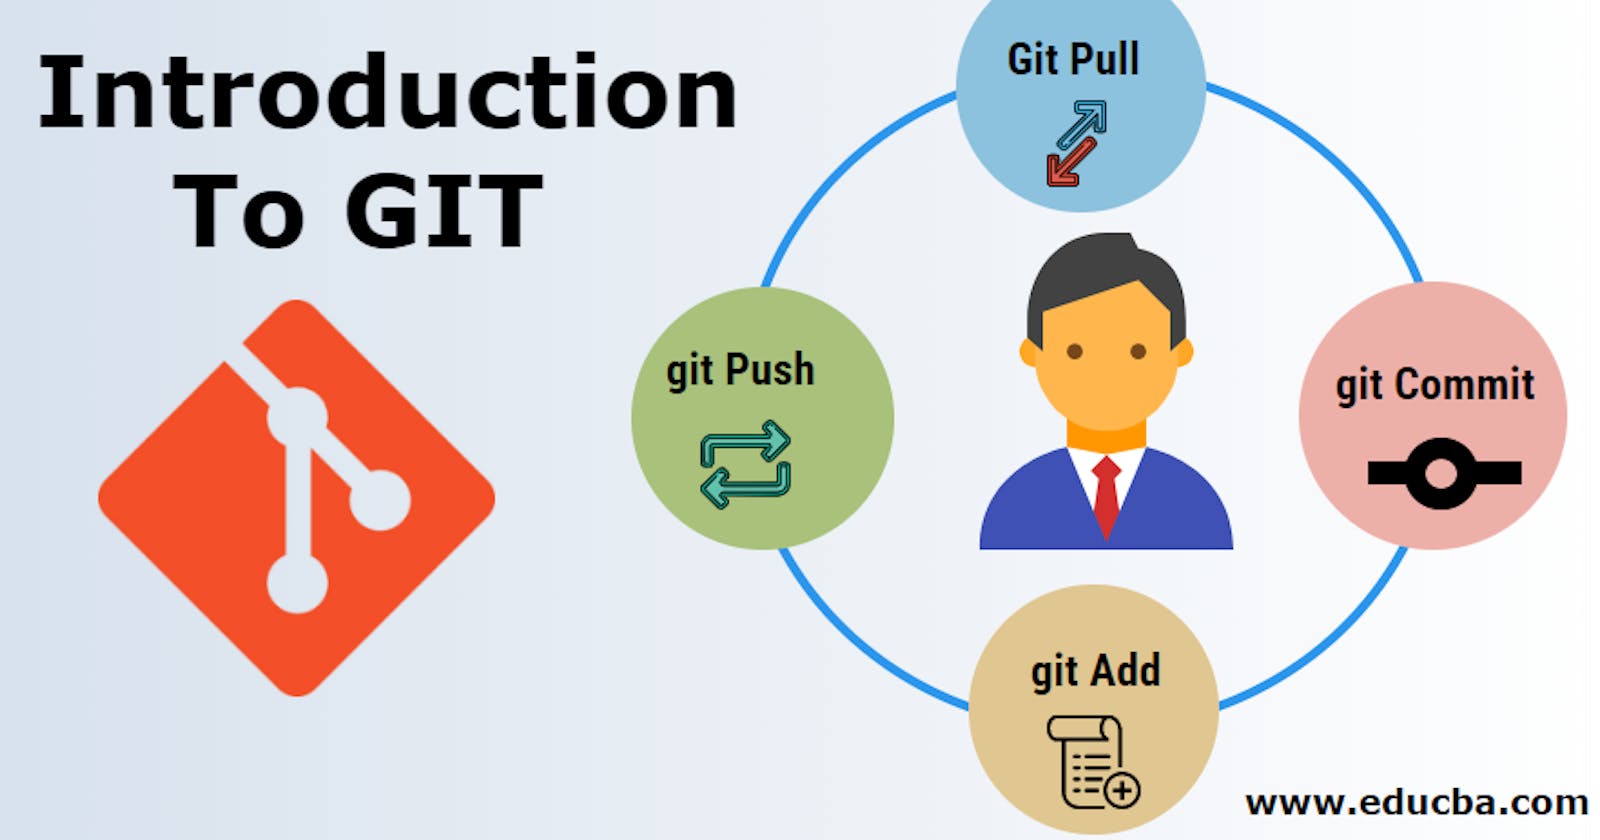 An Introduction to Git - Basic Understanding and Commands